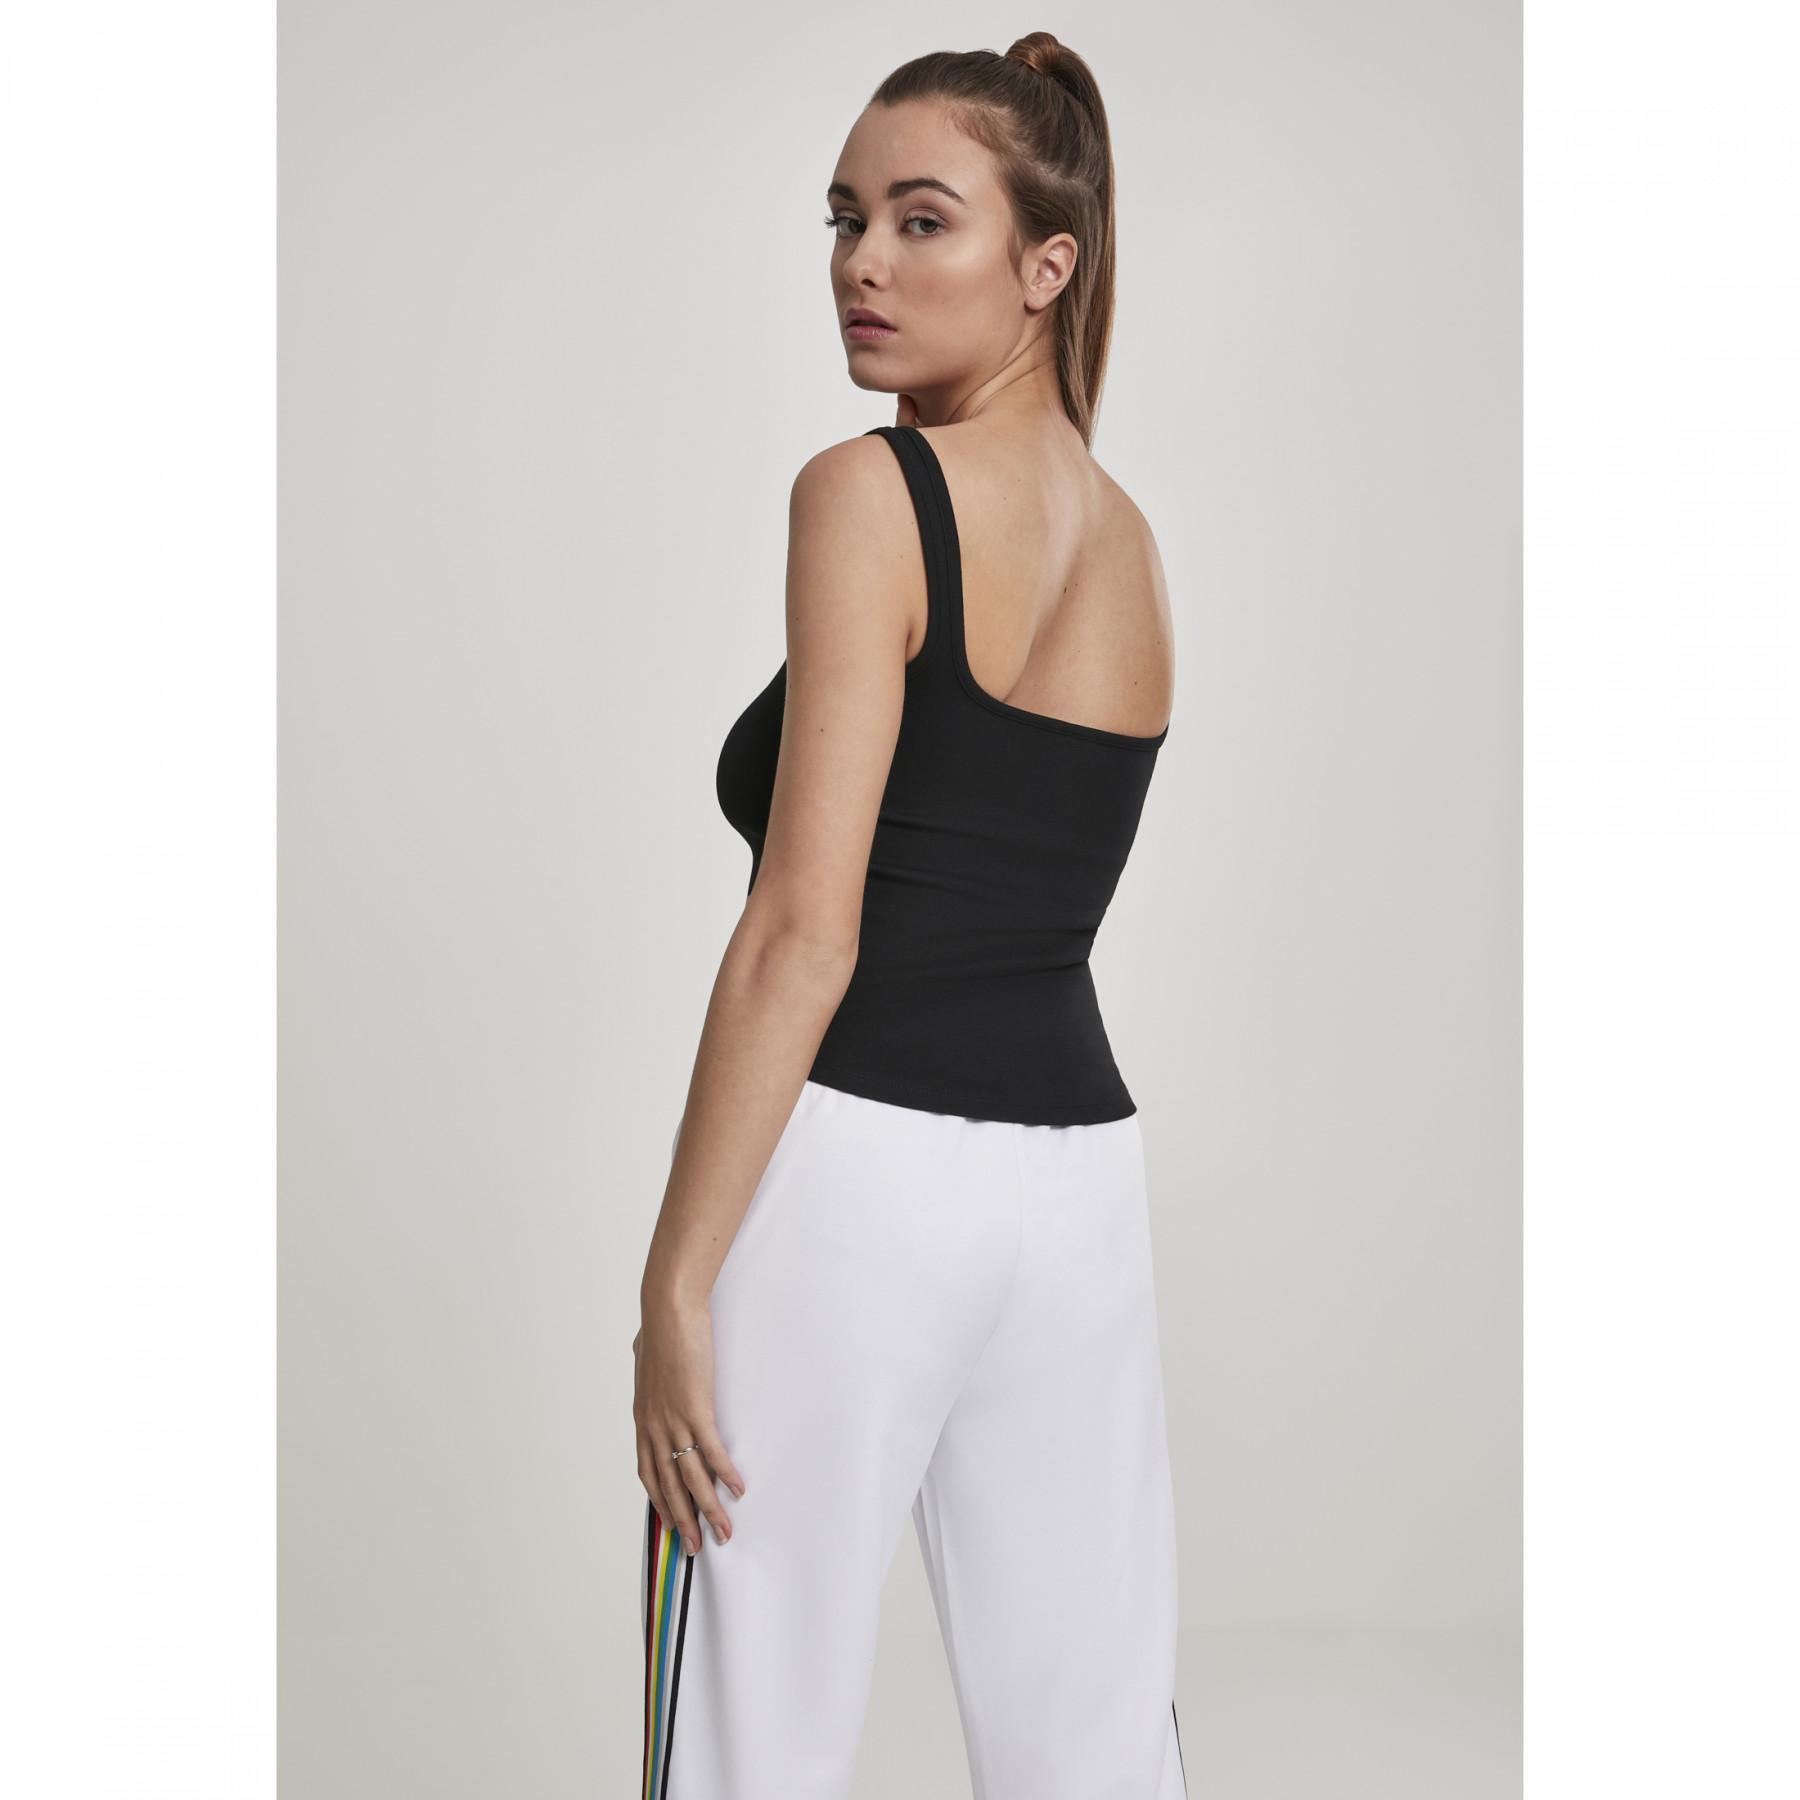 Crop top mujer Urban Classic ancho